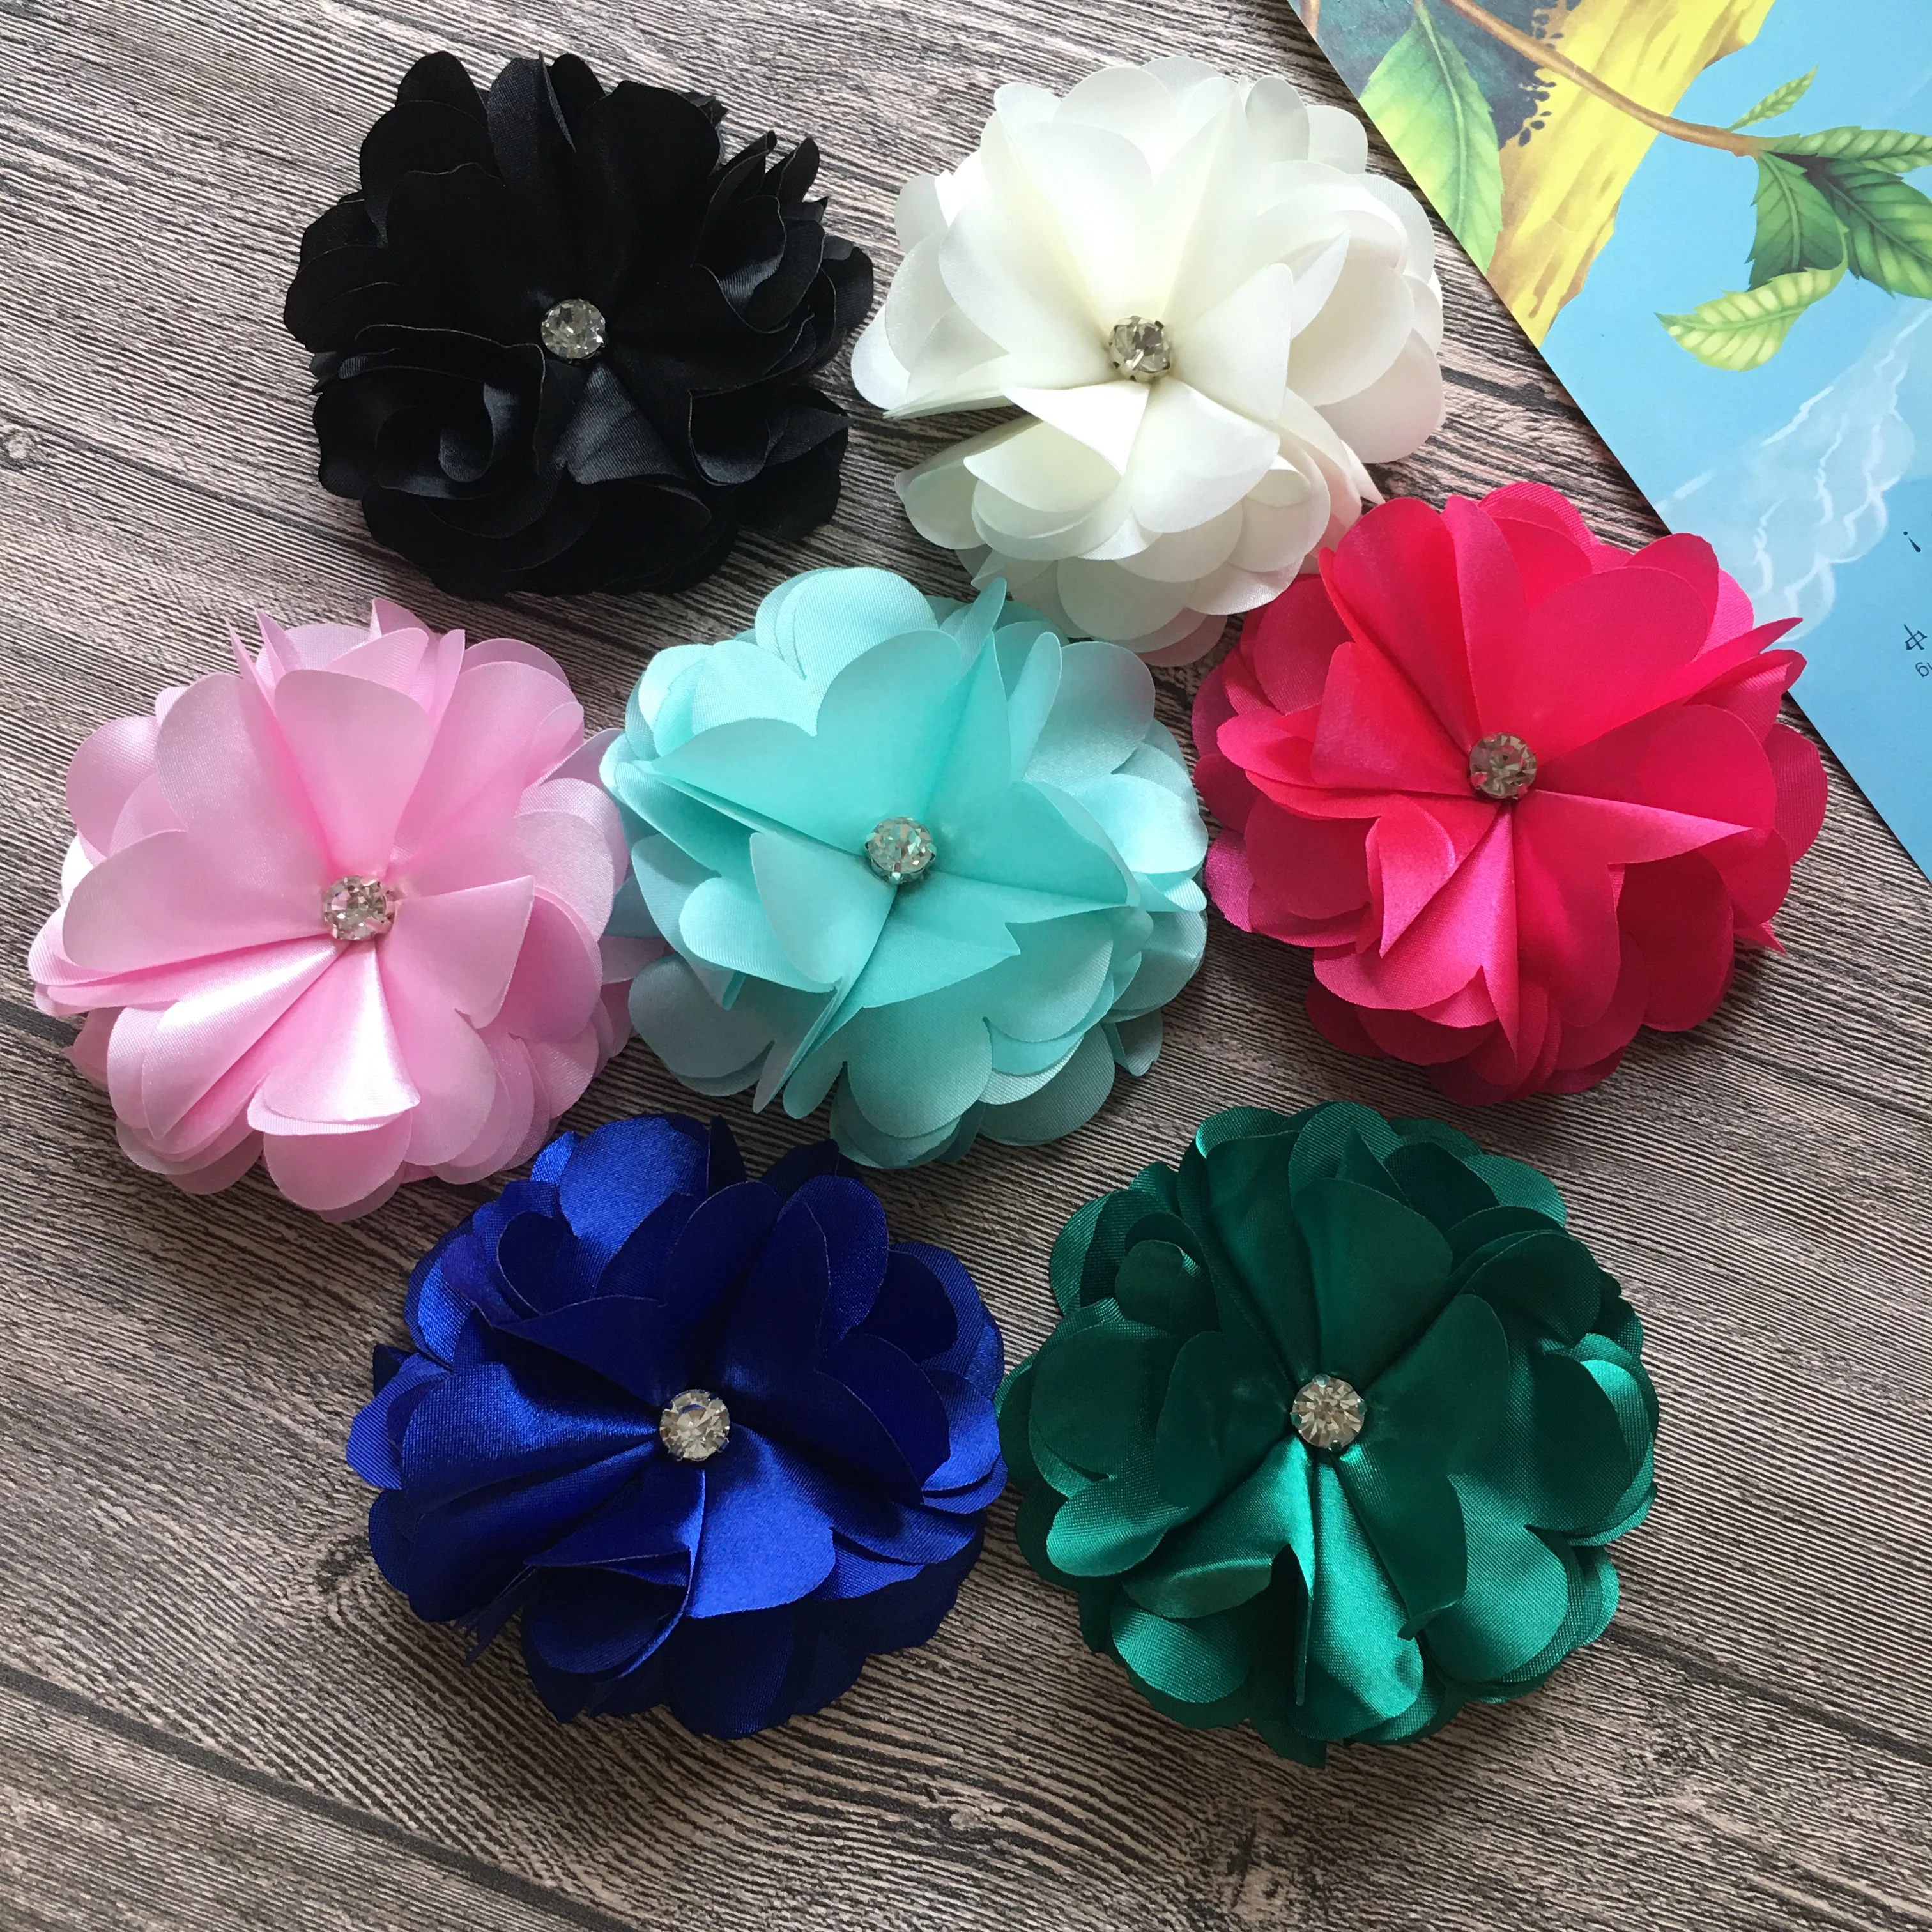 

10Pcs/Lot Flat Back 3.3" Bright Color Satin Flower With Crystal Decorated For Wedding Hats Brooches Home Pets Diy Accessories